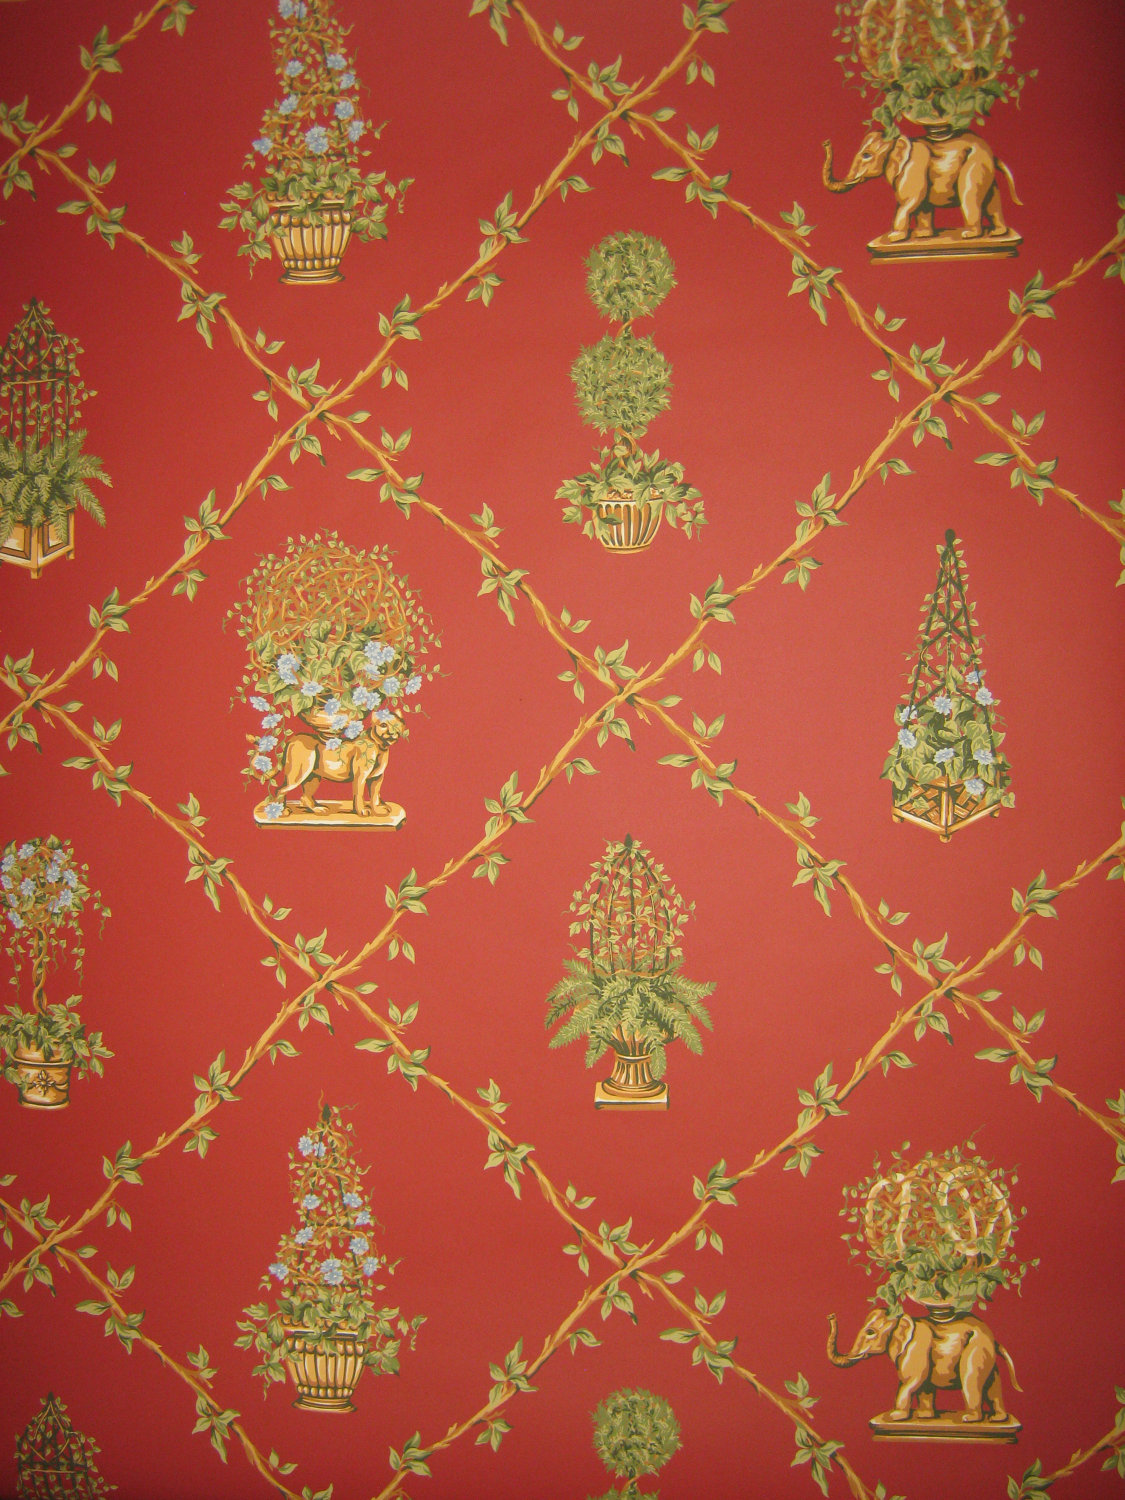 Symbolism In The Yellow Wallpaper